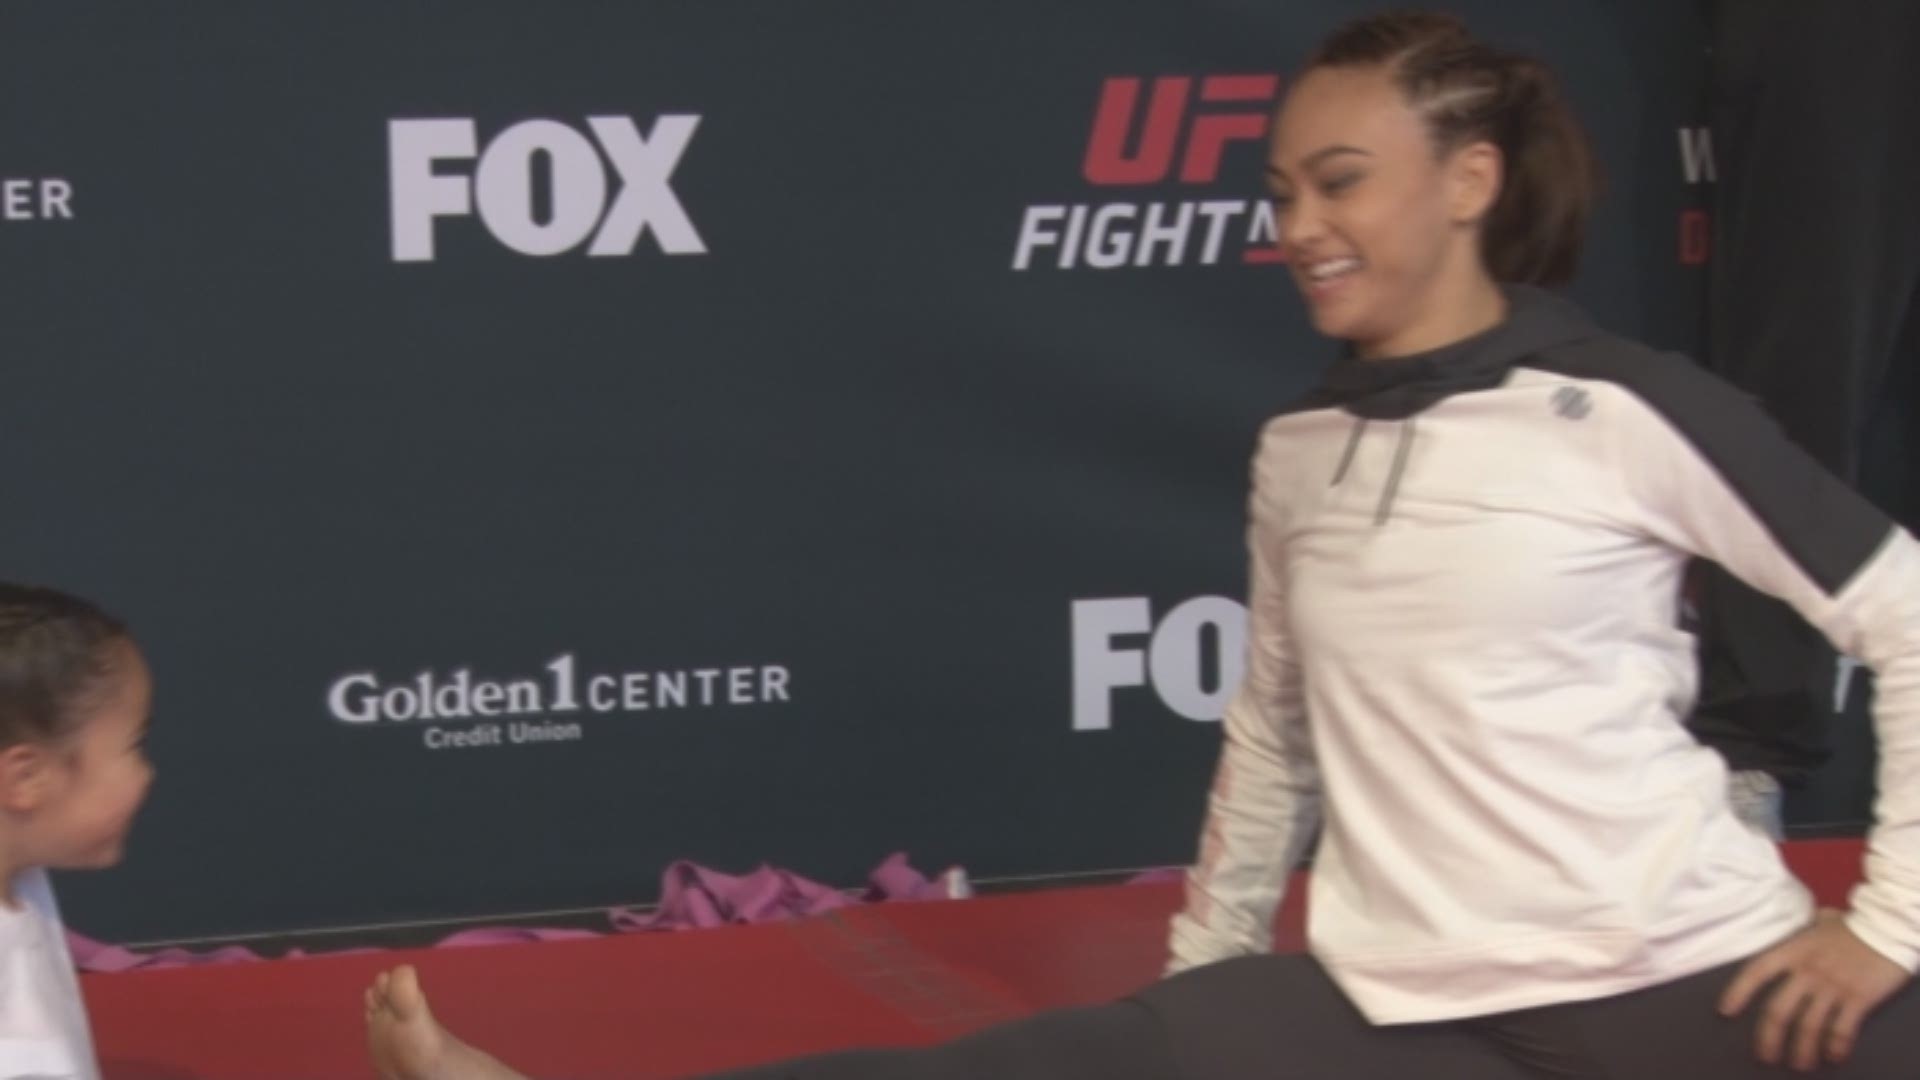 Sacramento fighters Urijah Faber, Paige VanZant and her headlining opponent Michelle Waterson participated in an open workout in front of the public at Golden 1 Center on Thursday. (12/15/2016)